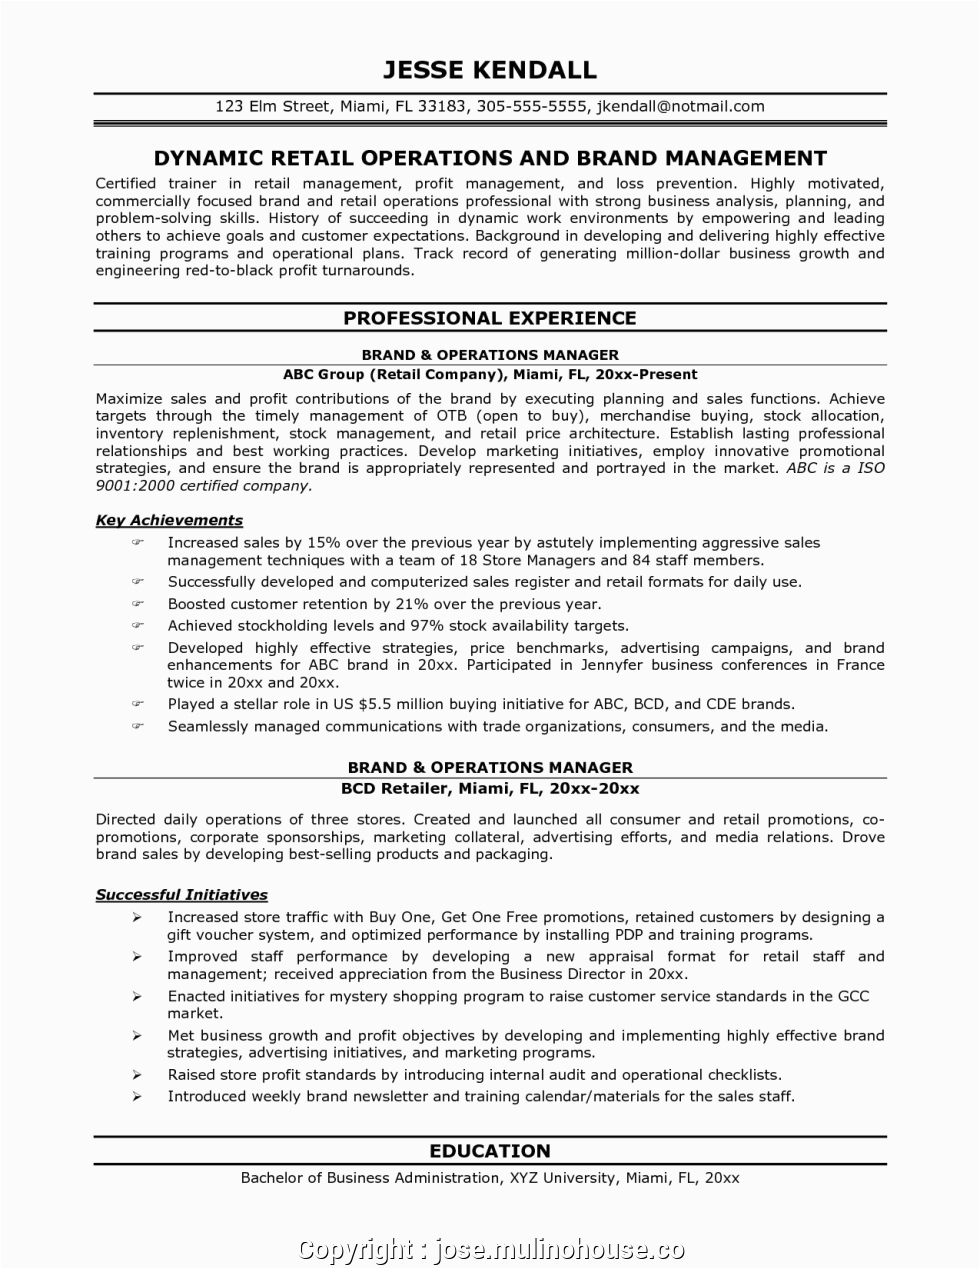 Sample Resume for Retail Operations Manager Executive Retail Operation Manager Resume Objective